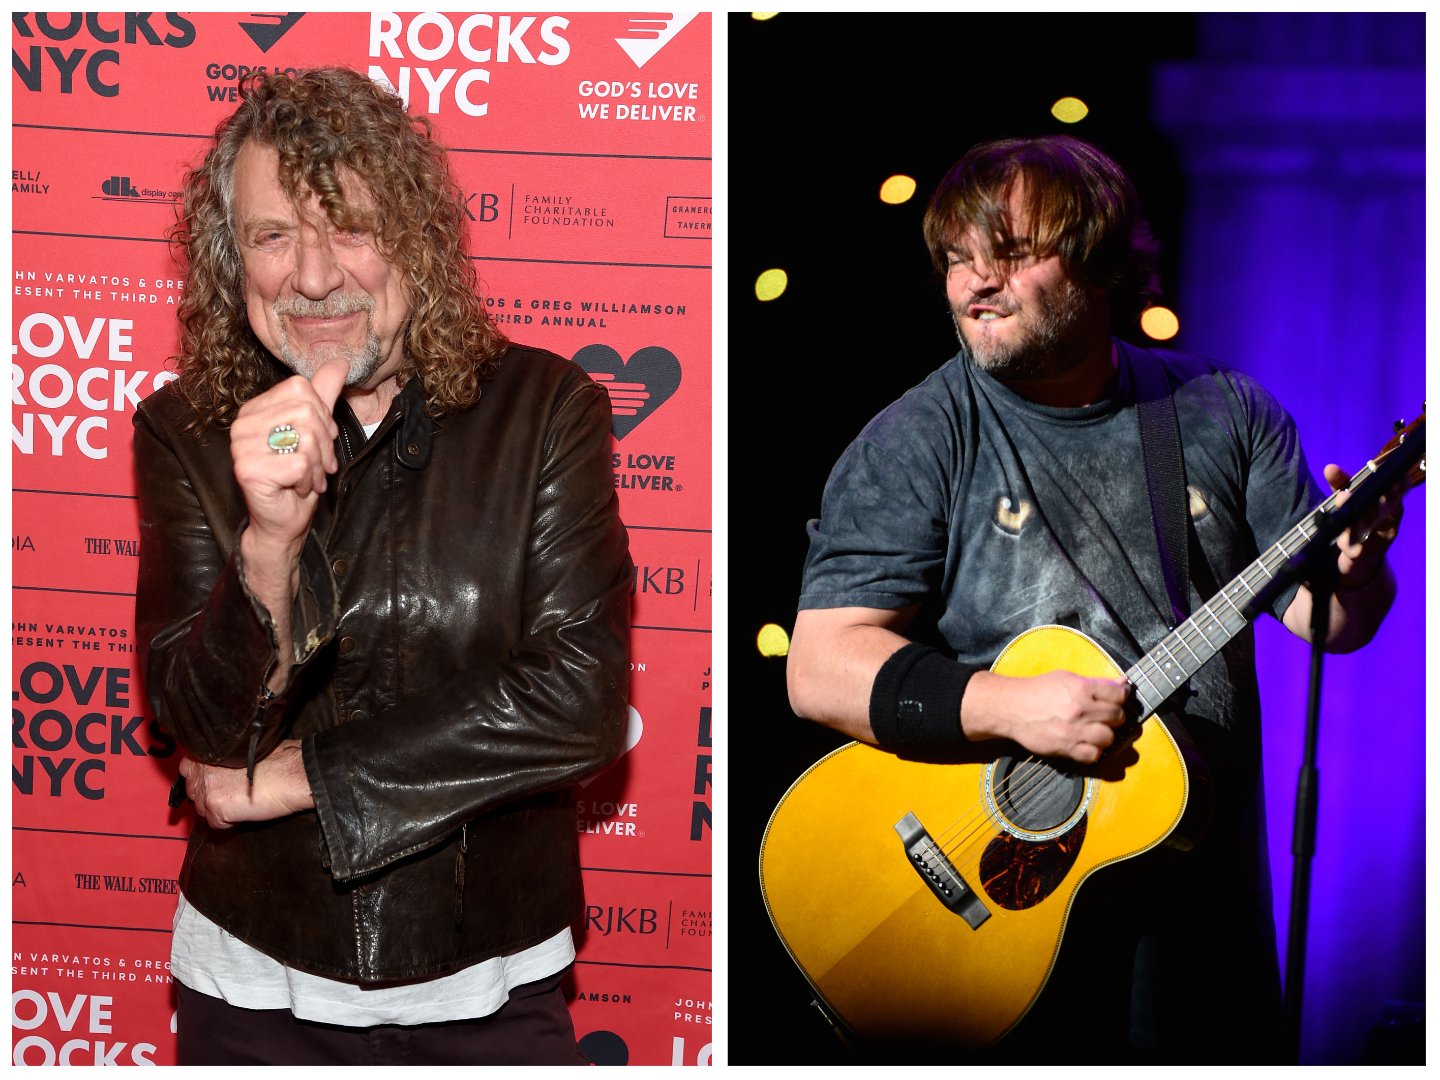 Robert Plant wears a black jacket in front of a red background. Jack Black plays guitar on a stage.